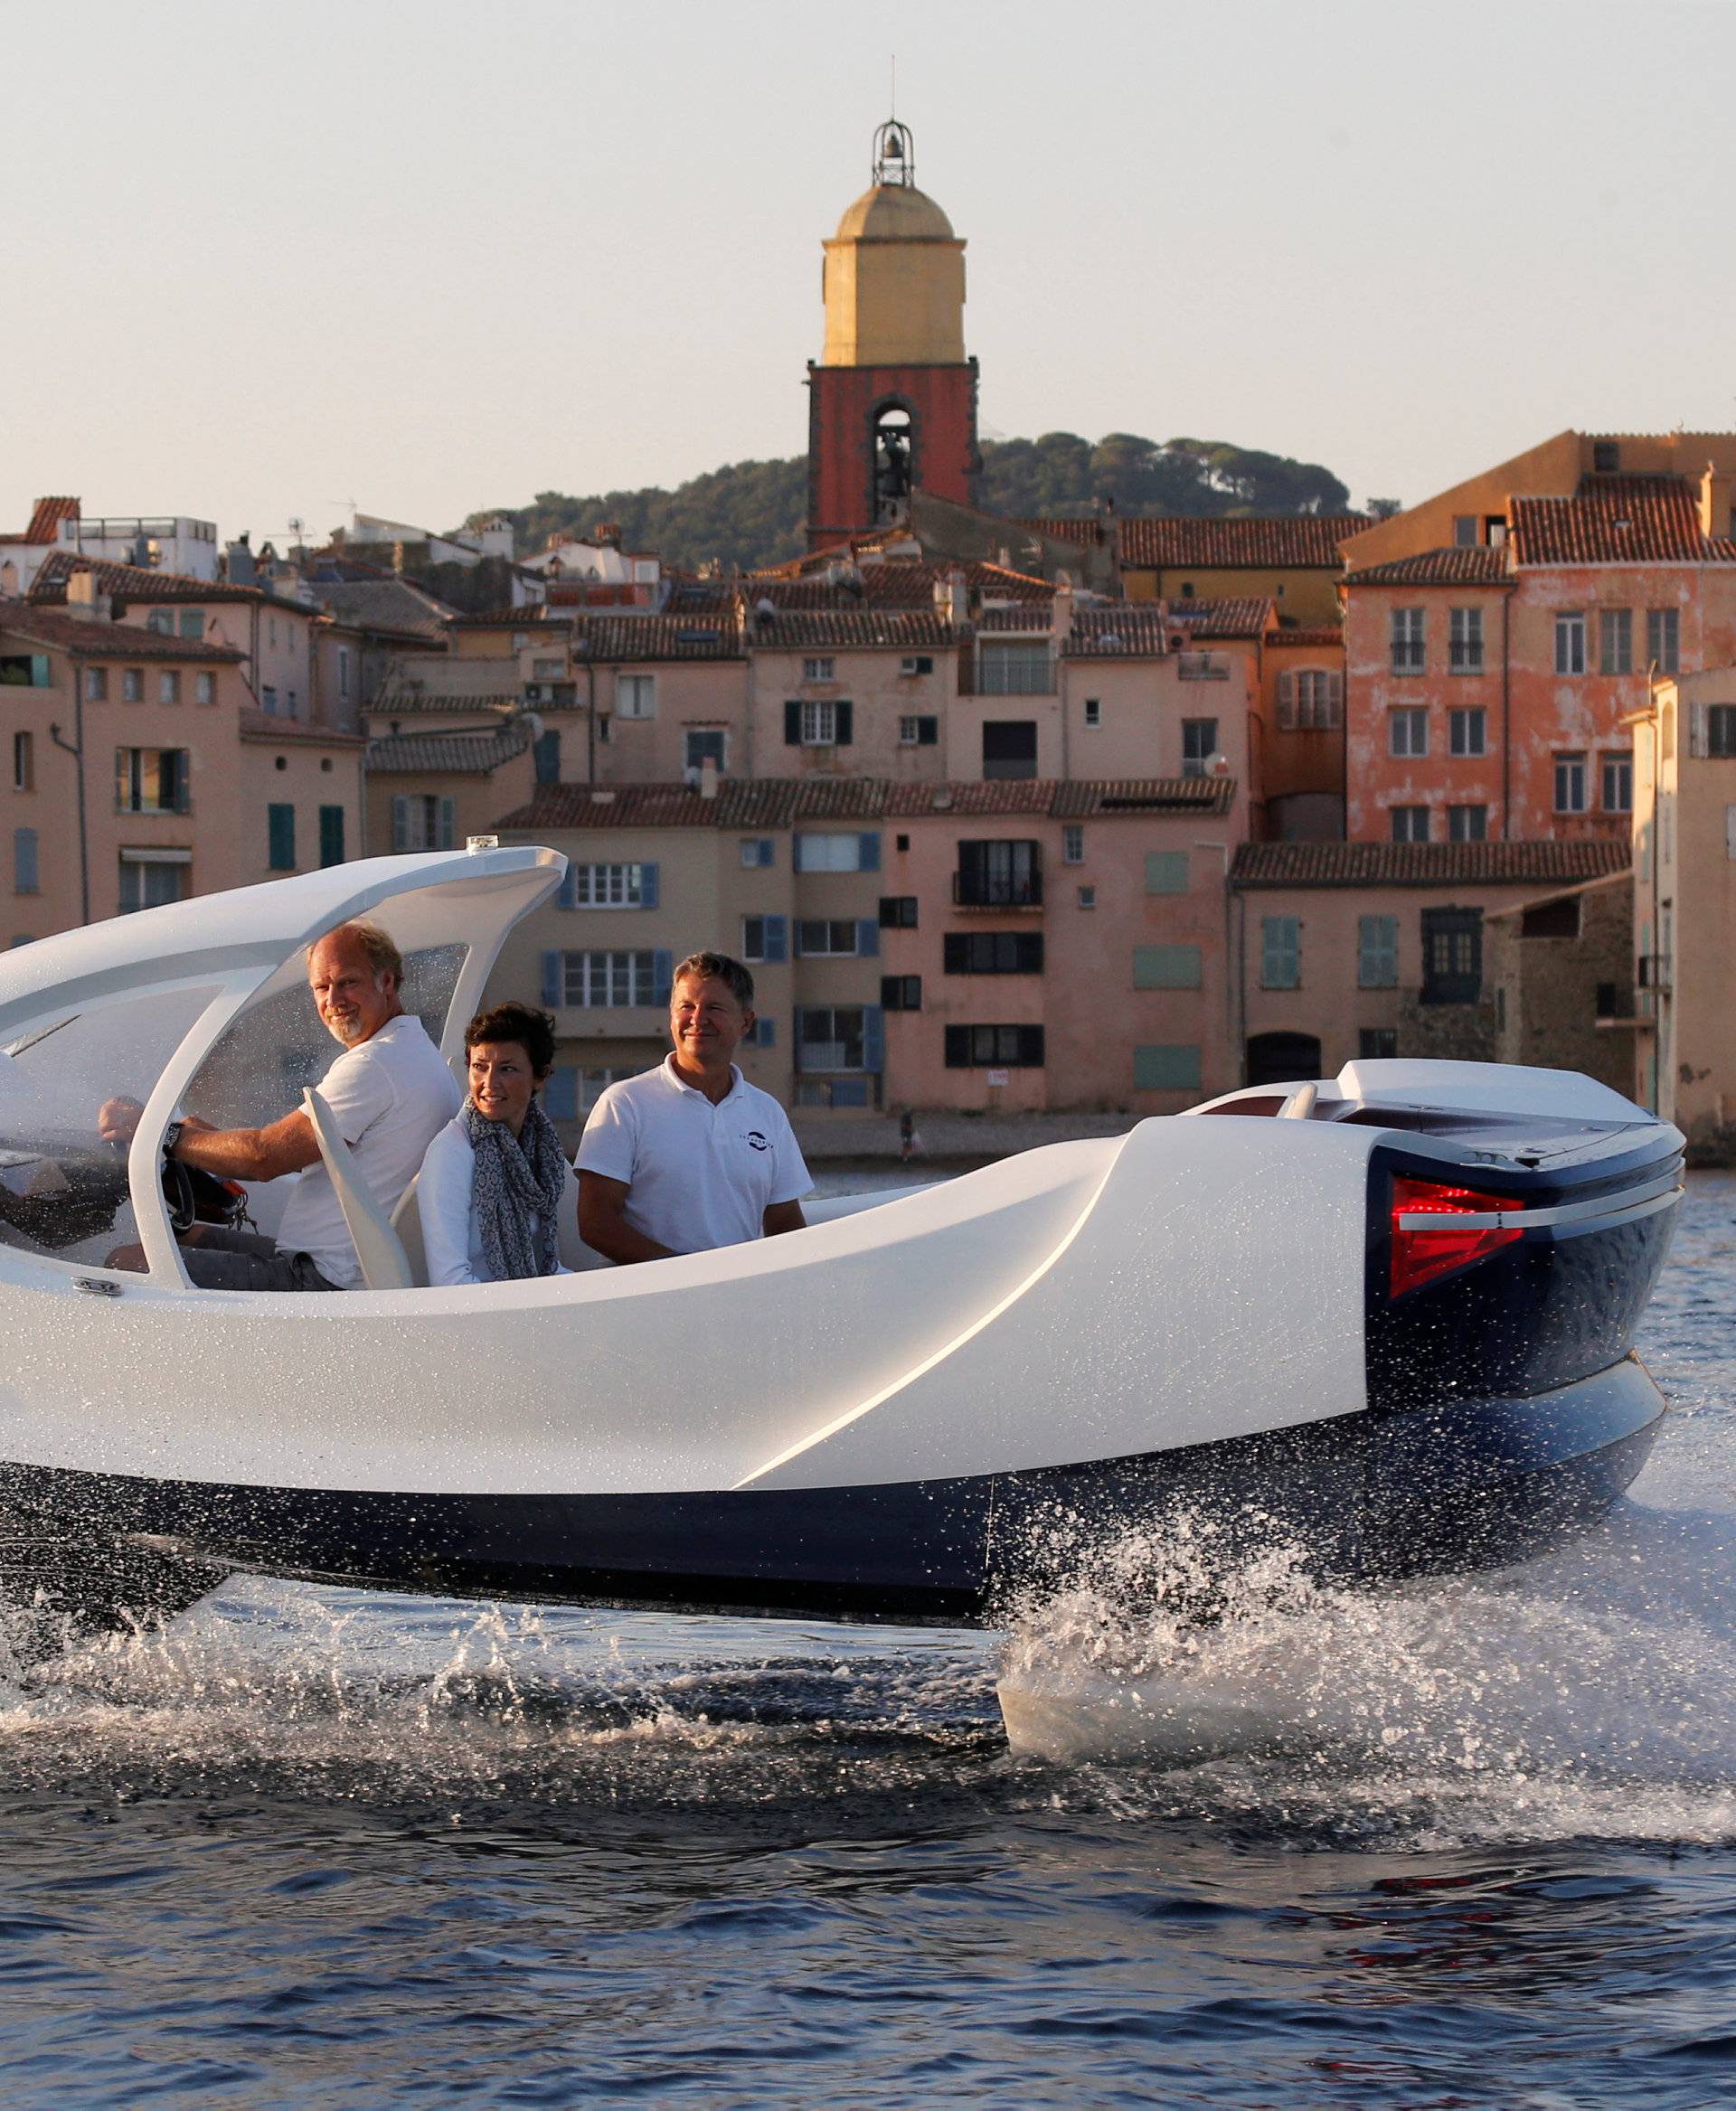 SeaBubbles executives are seen aboard prototype of their water taxi in the harbour of Saint-Tropez